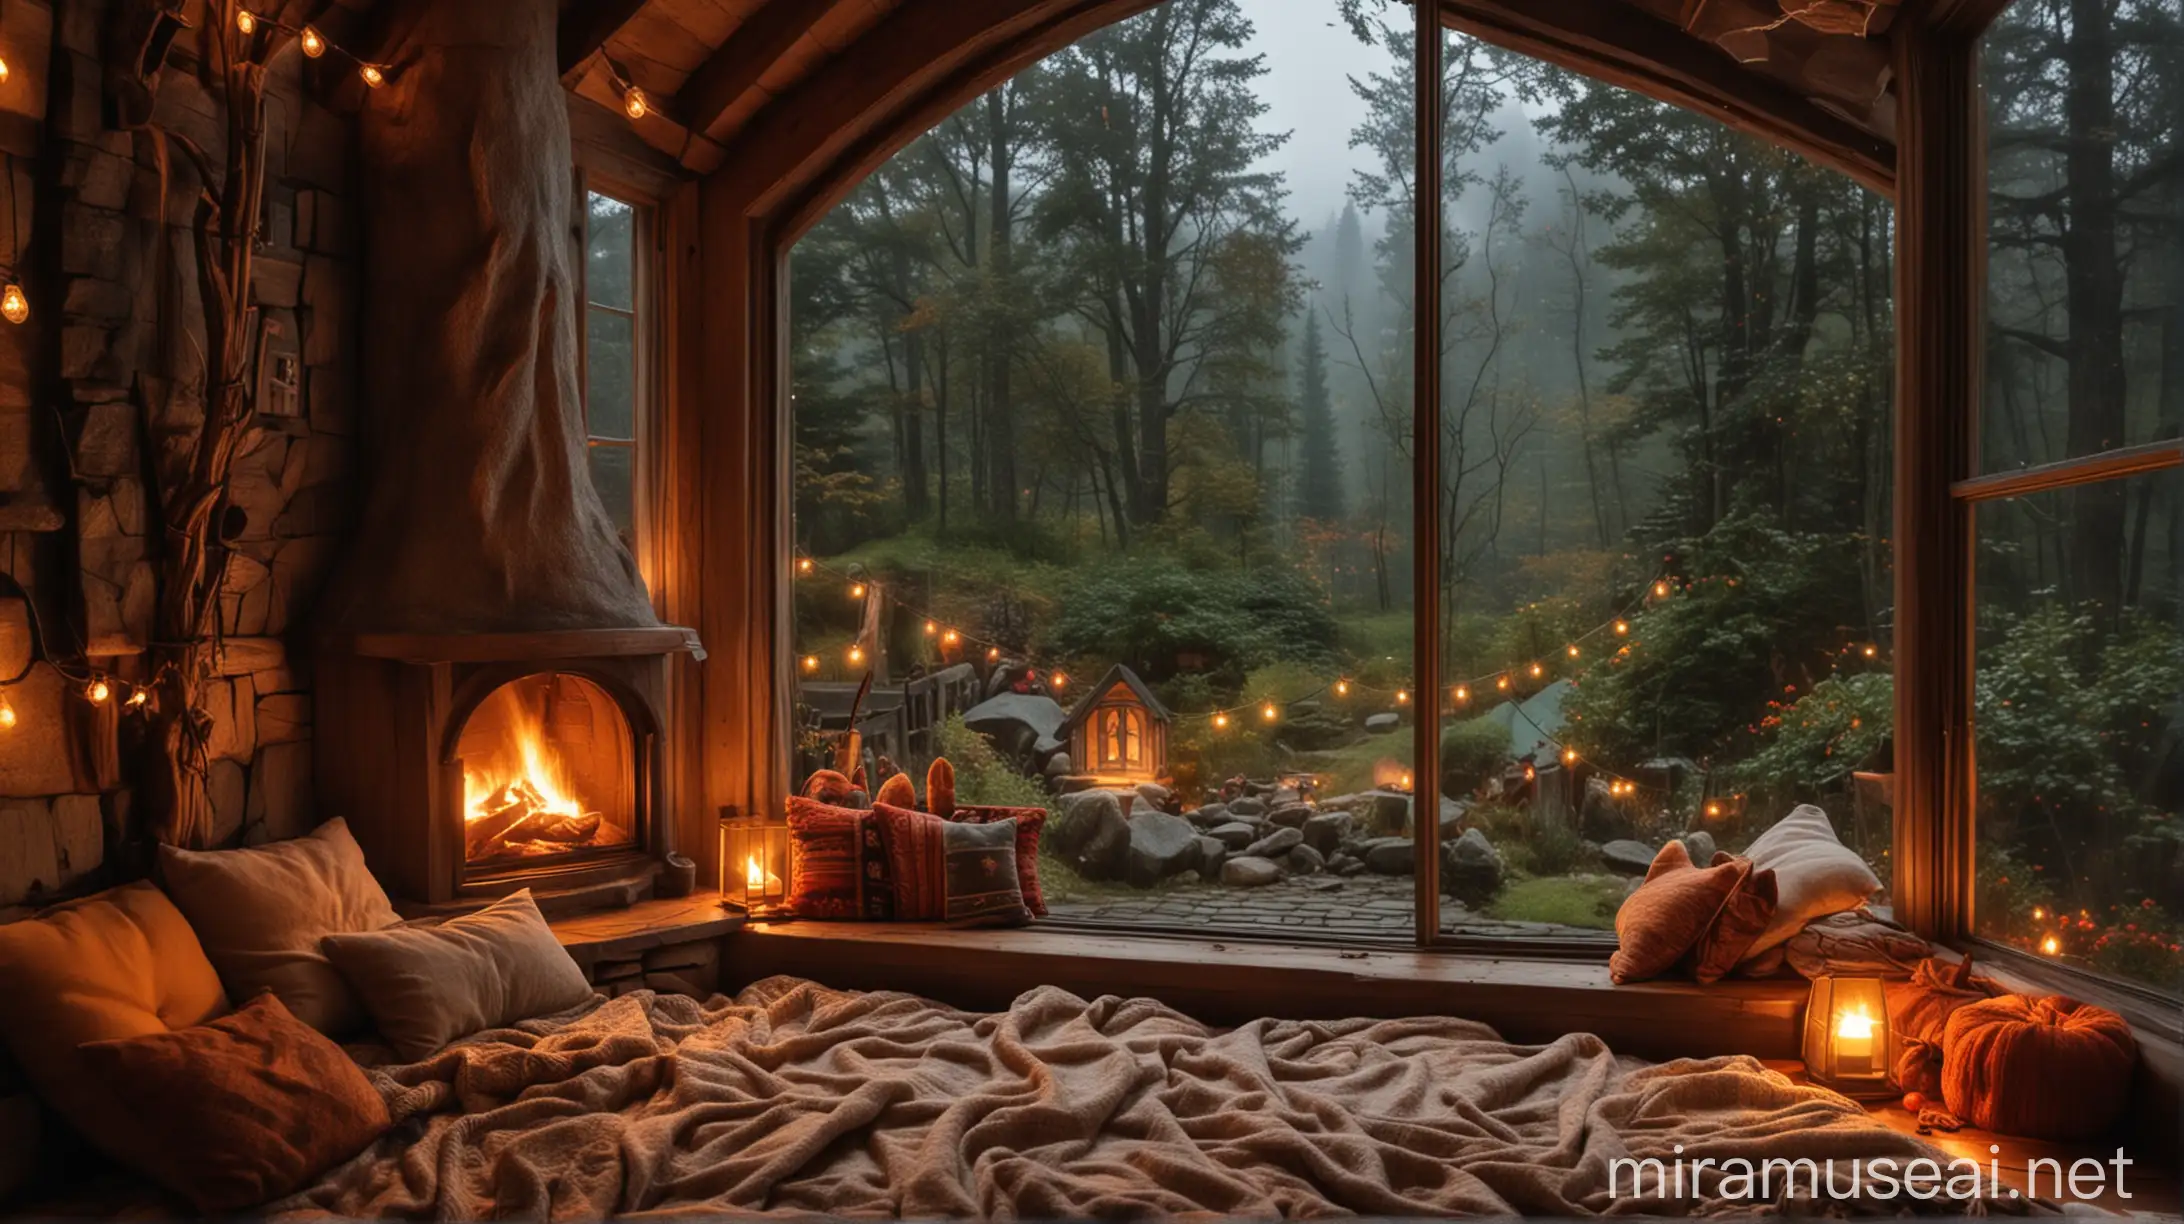  Cozy hobbit house room, with two small cozy  pillows, string lights, blankets, a roaring fireplace, big window with a rainy fall night deep forest view., Mysterious with fireplace With window waterfall view